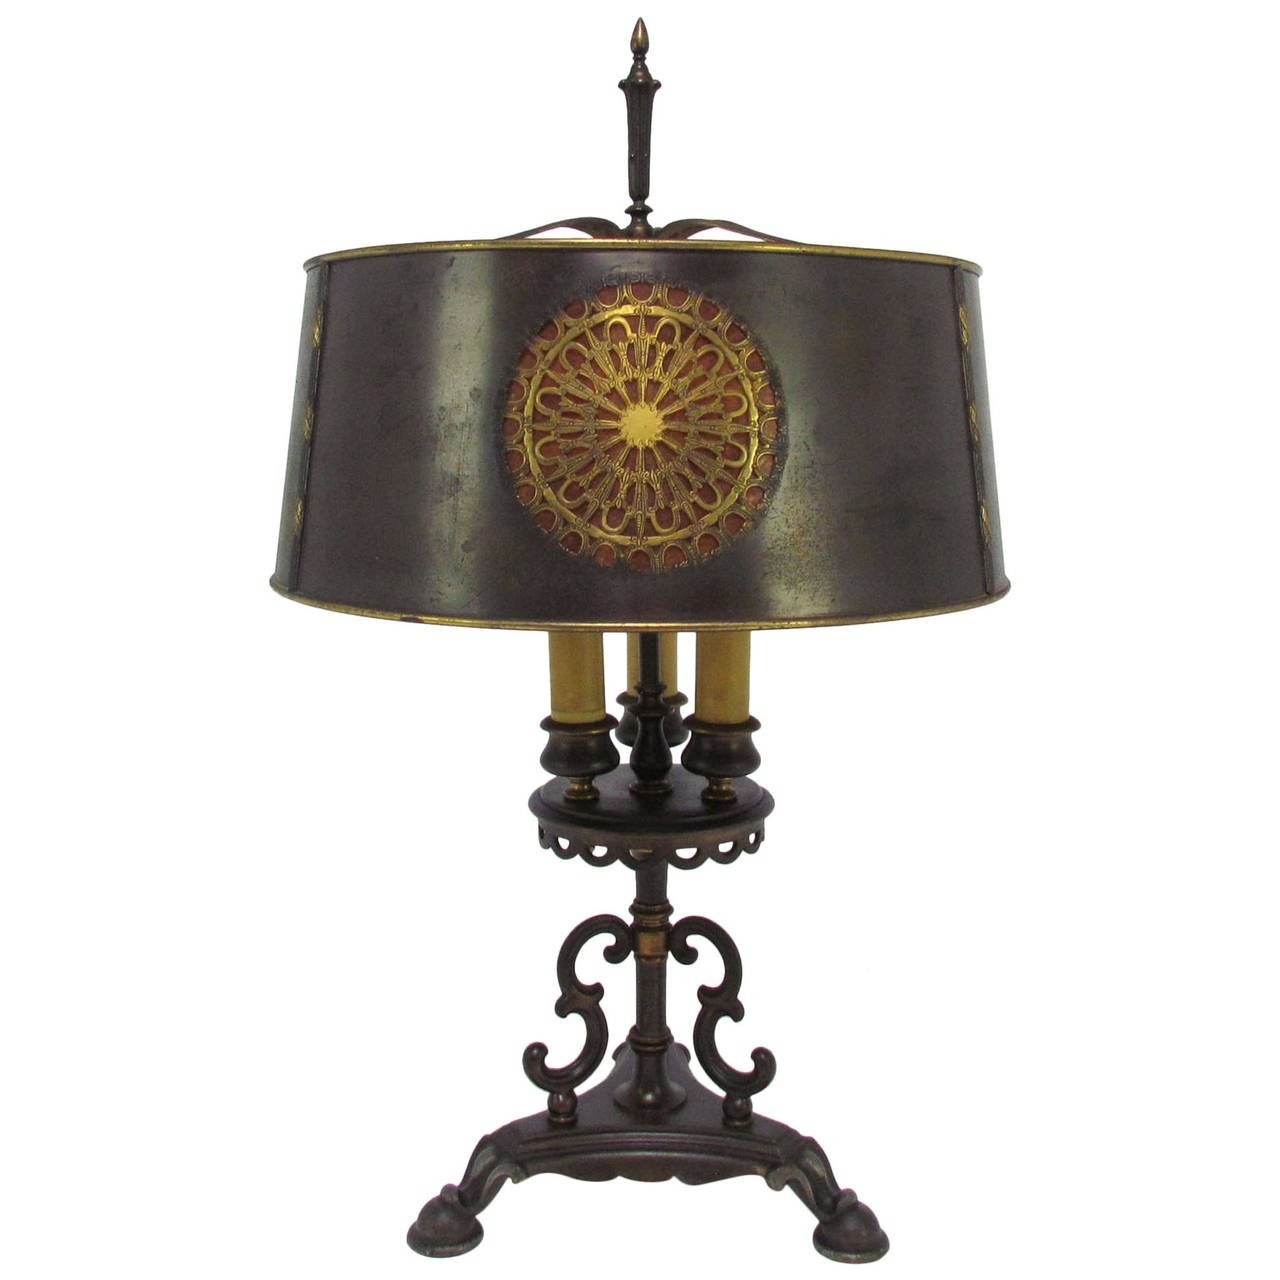 Spanish colonial revival table lamp by mutual sunset for